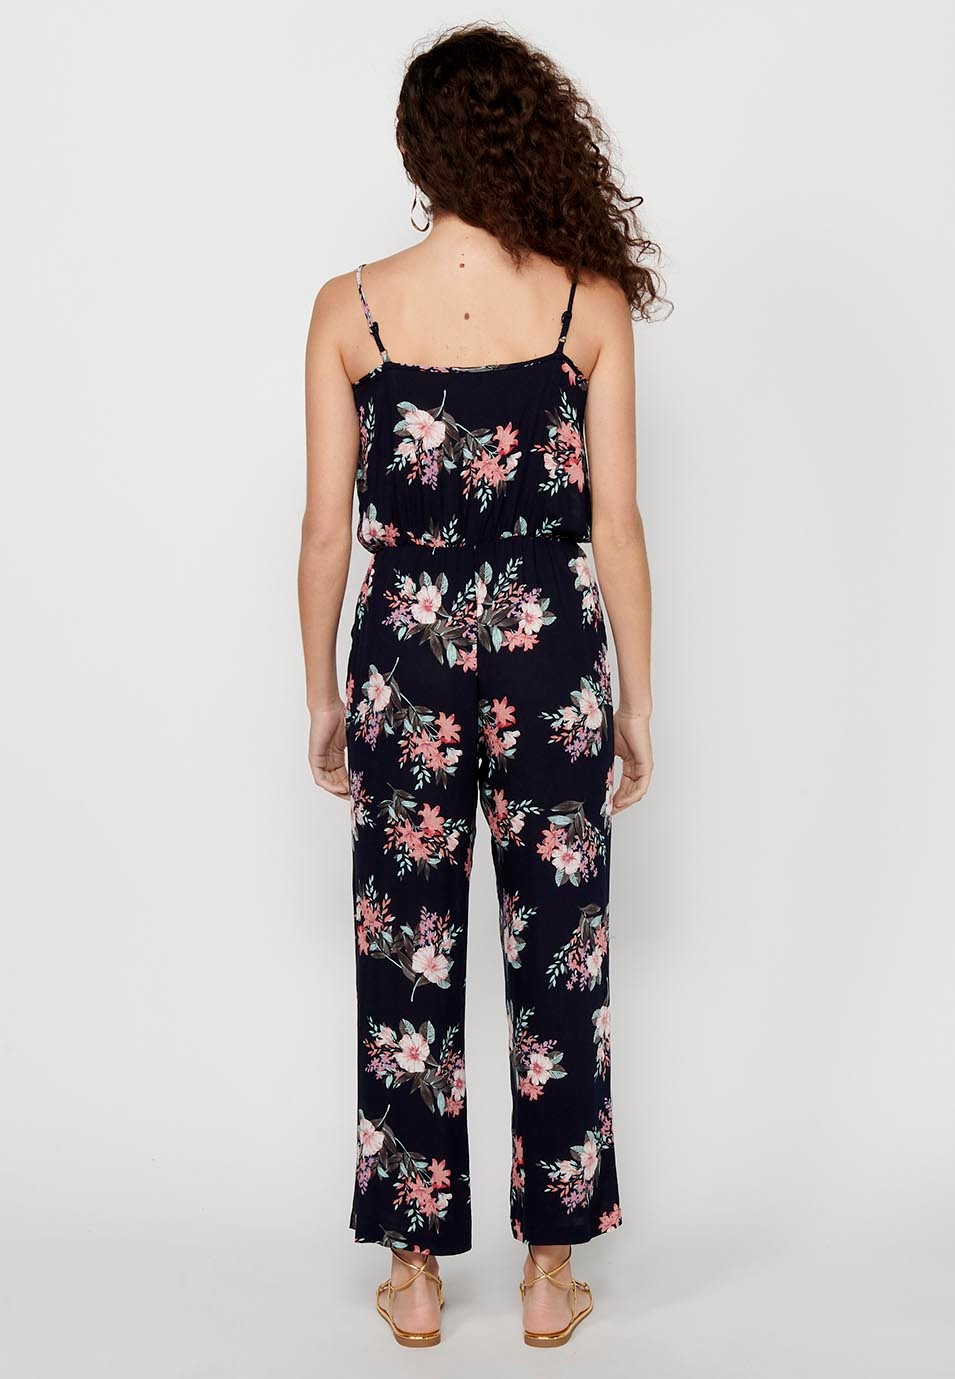 Long jumpsuit dress with adjustable straps with rubberized waist and blue floral print for Women 7